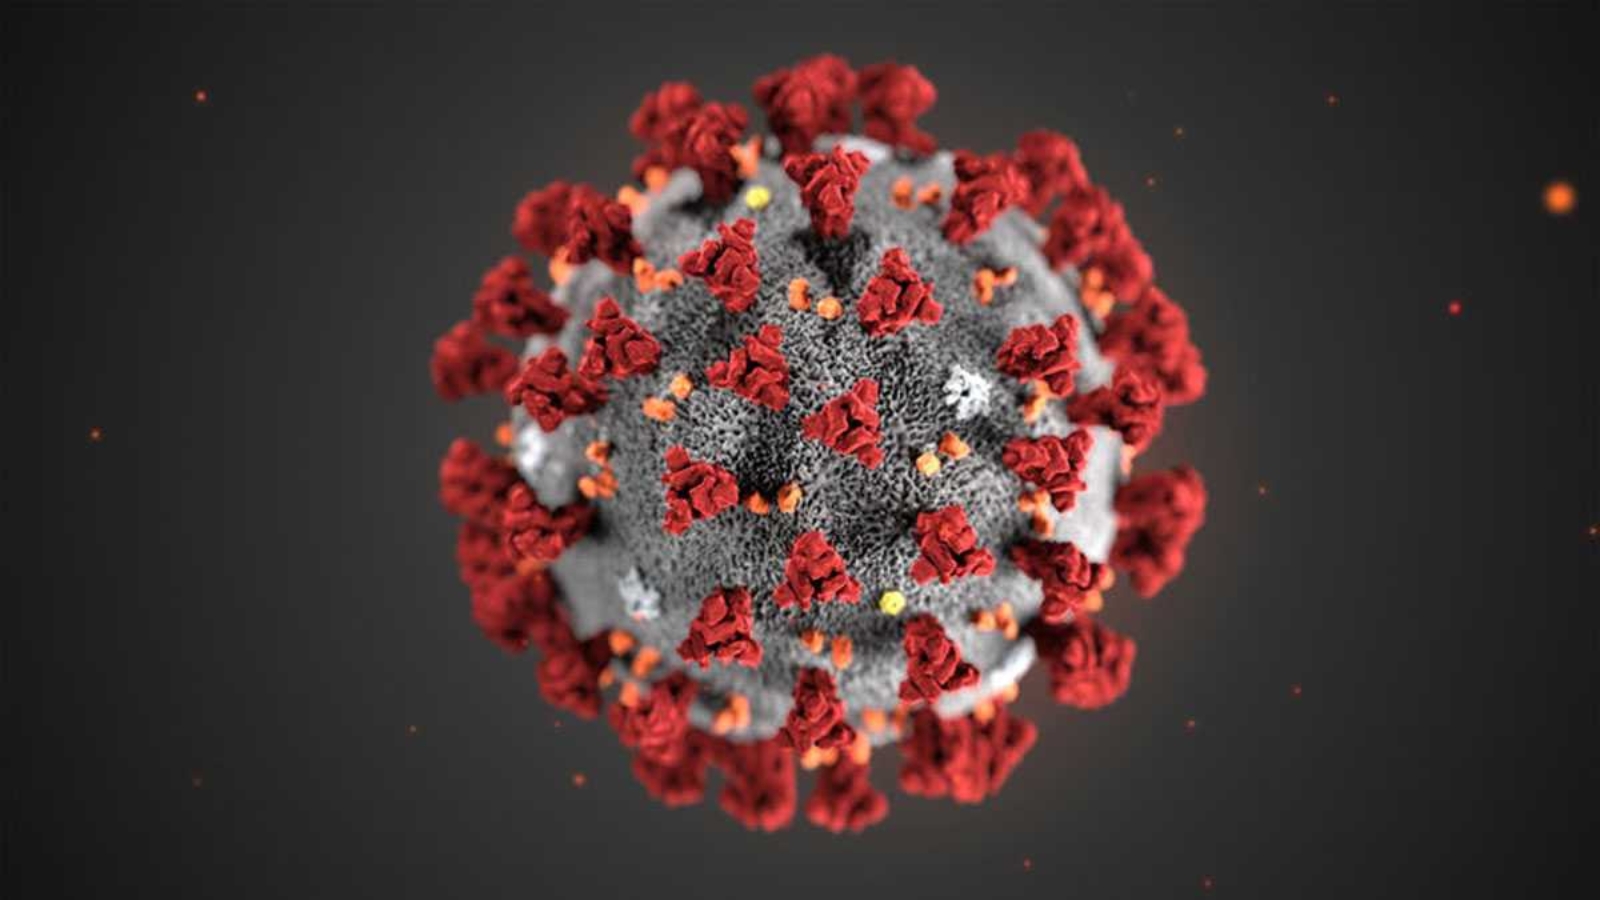 e8b73e3e-an-illustration-created-by-the-centers-for-disease-control-and-prevention-shows-the-structure-of-the-coronavirus-now-named-covid-19-1